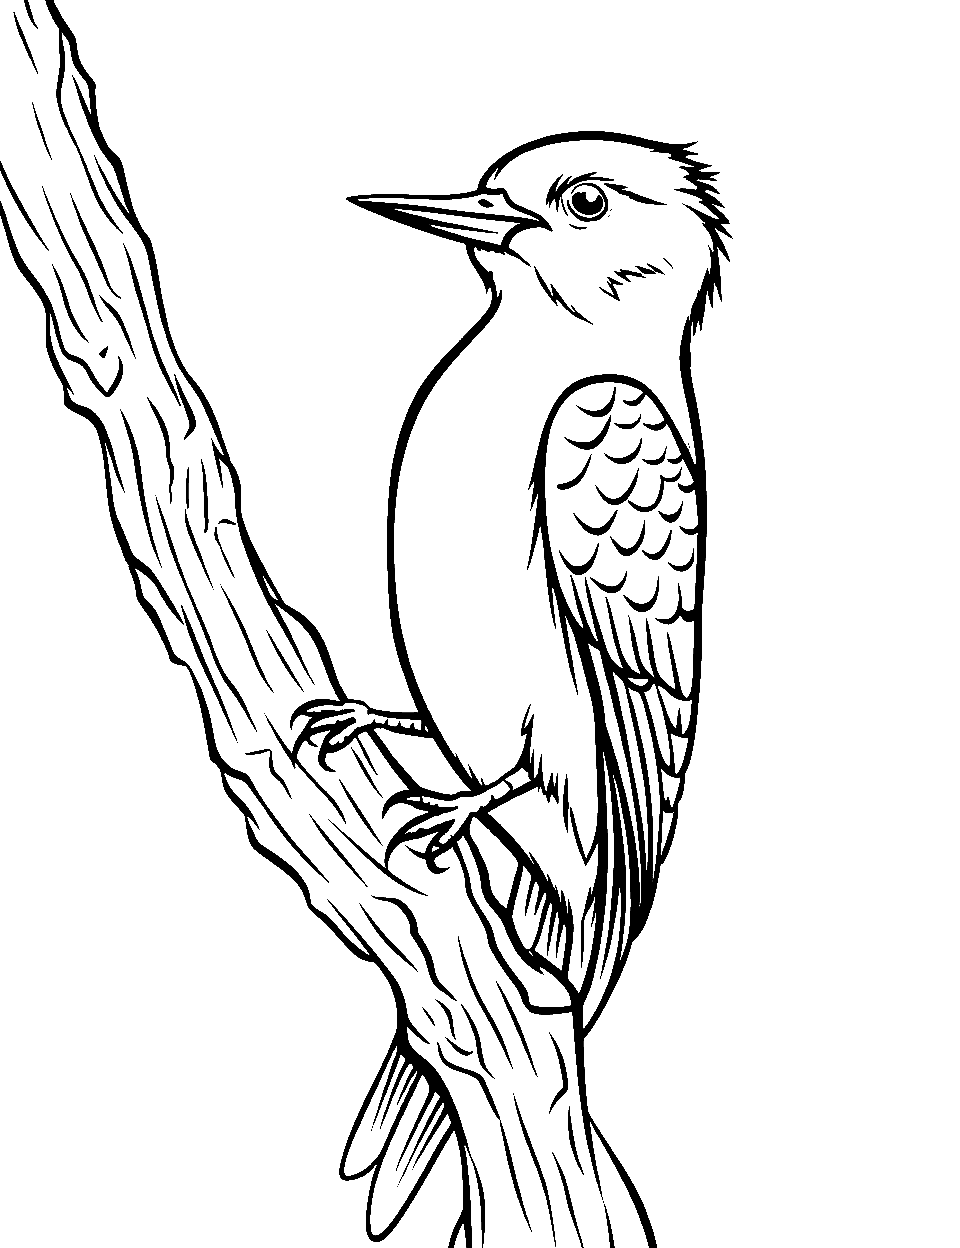 Woodpecker at Work Coloring Page - A woodpecker ready to peck away at a tree trunk.